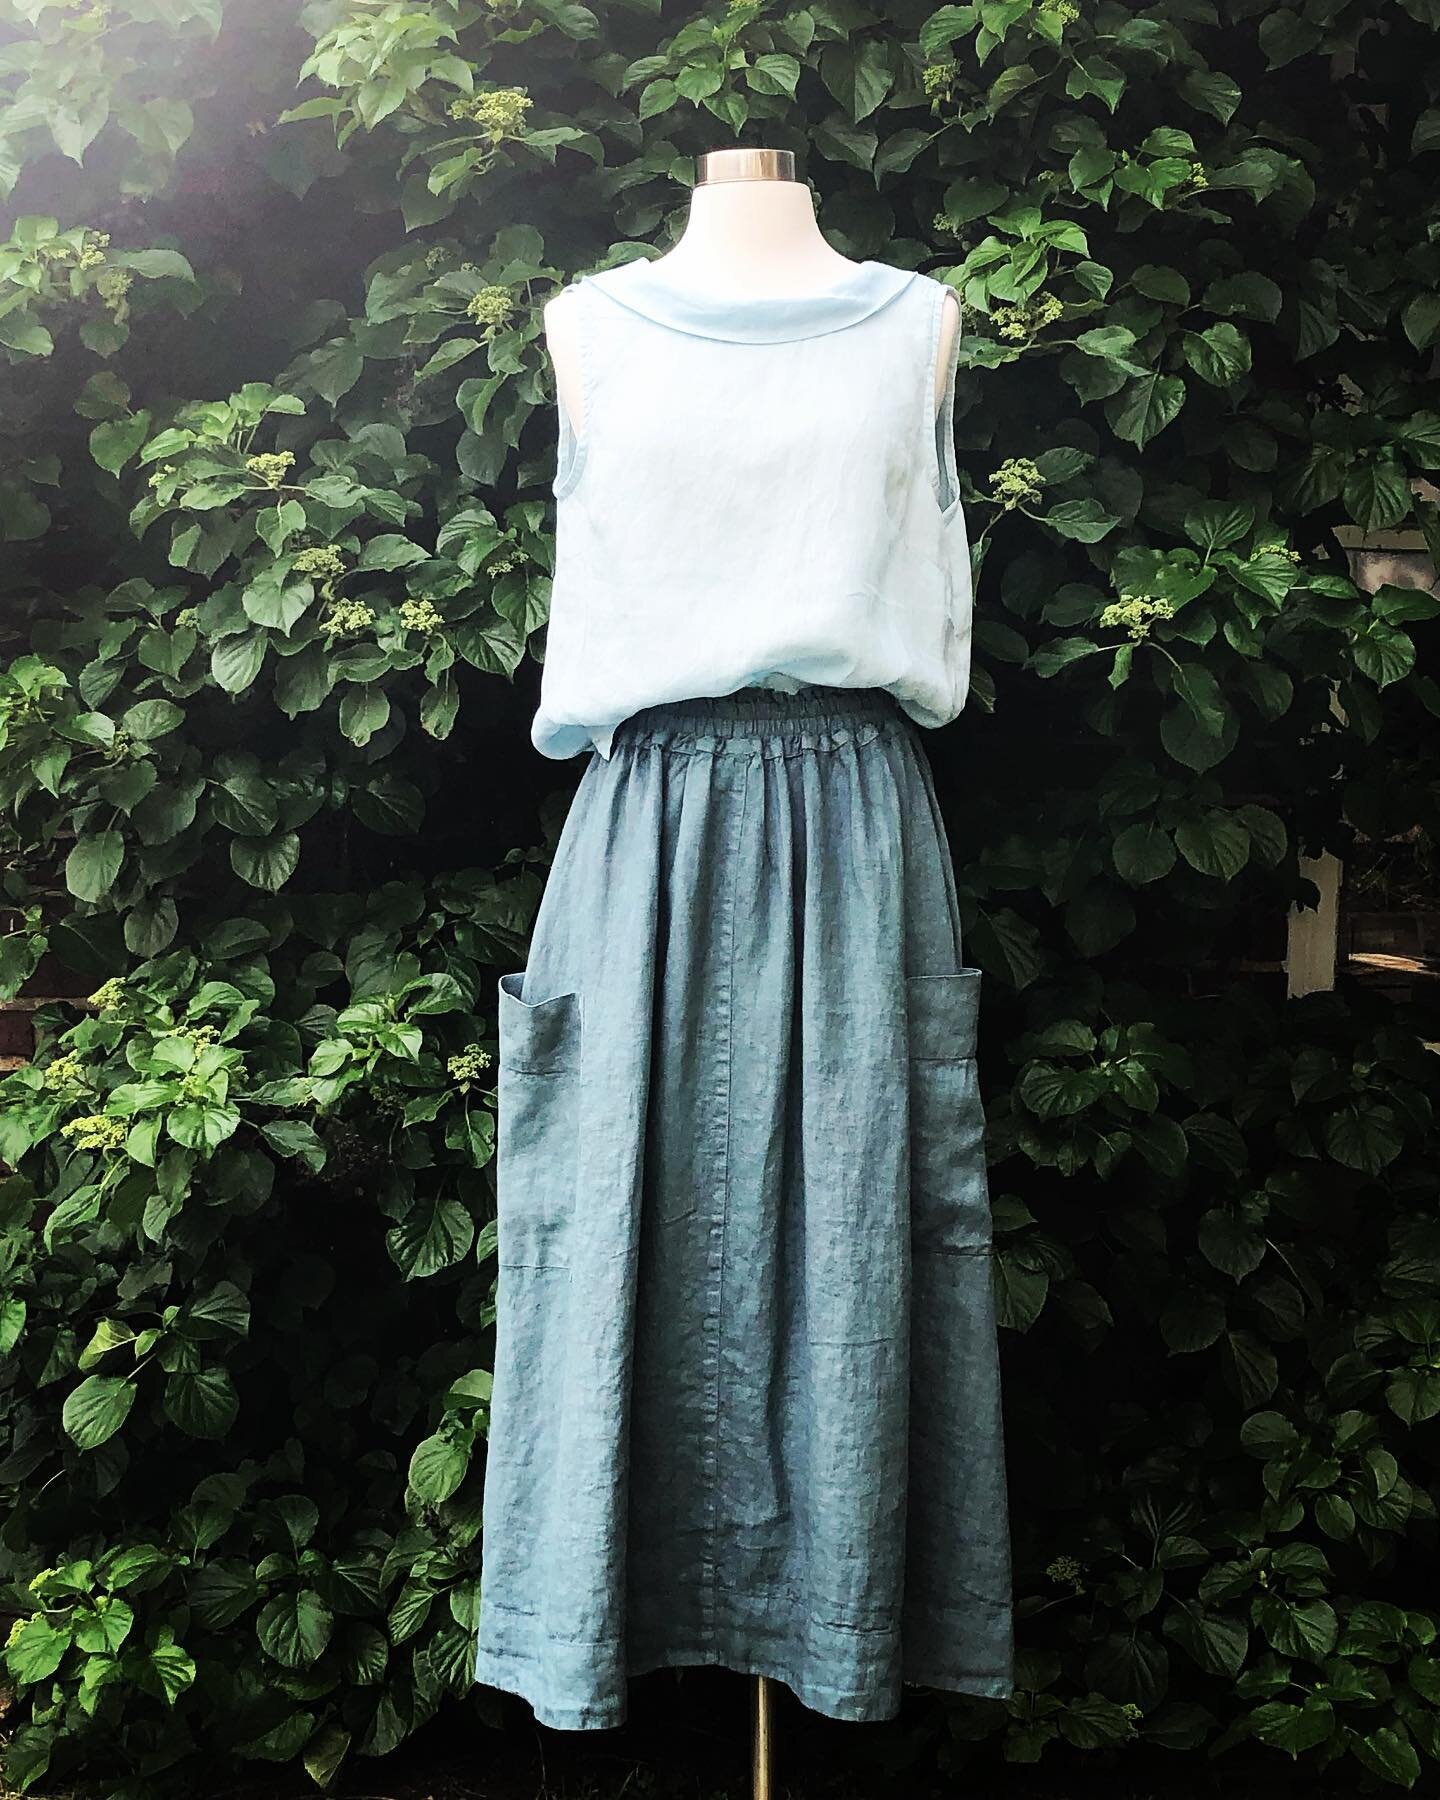 Be garden party ready in our new arrivals, like the Verso Top and Patch Pocket Skirt. Both in 100% linen with a nice, easy fit🍃
.
.
.

#ethicalfashion #slowfashion #slowliving #sustainableliving #smartfashion #sustainablefashion #shoplocal #shopsmal